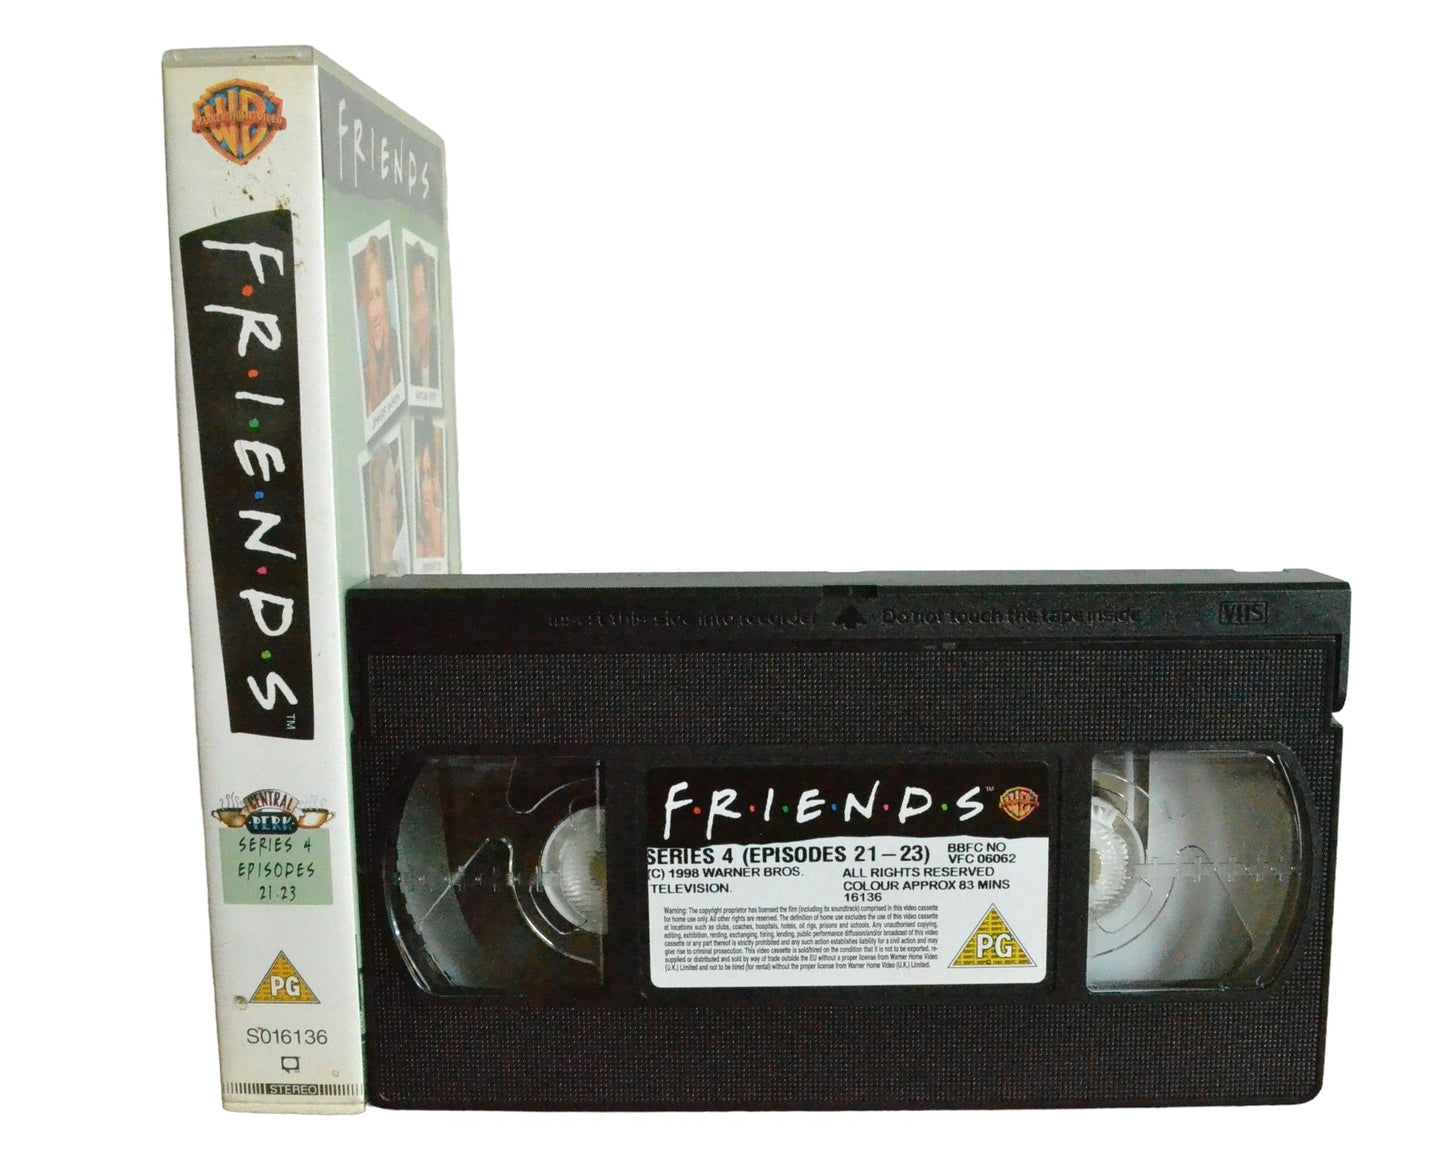 Friends Series 4 (Episodes 21 - 23) - Jennifer Aniston - Warner Home Video - SO16136 - Comedy - Pal - VHS-